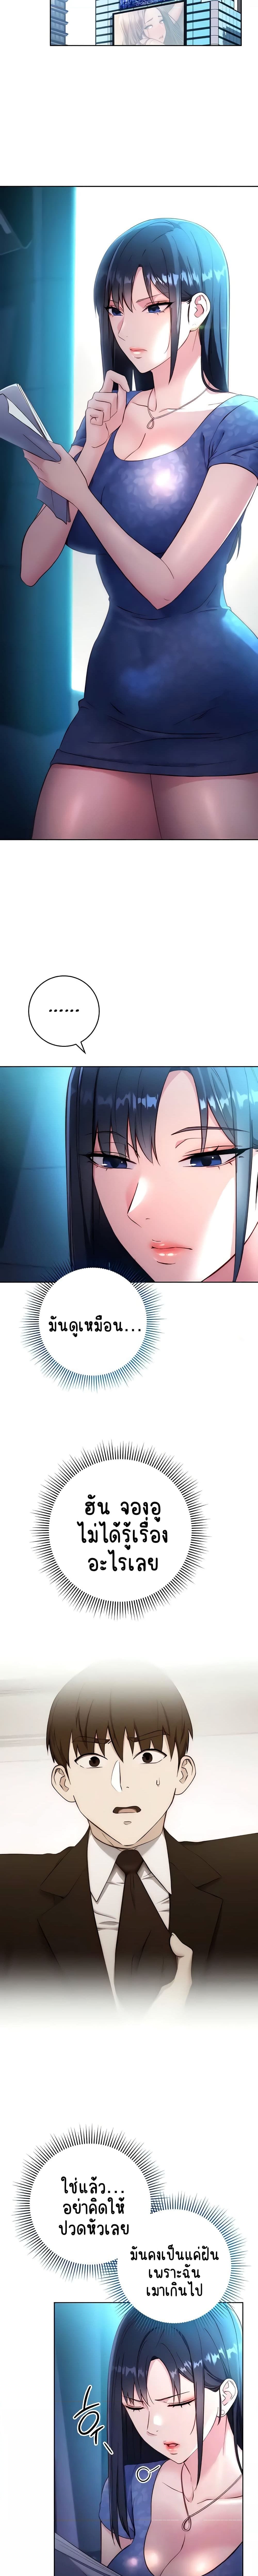 Outsider: The Invisible Man ตอนที่ 4 ภาพ 13